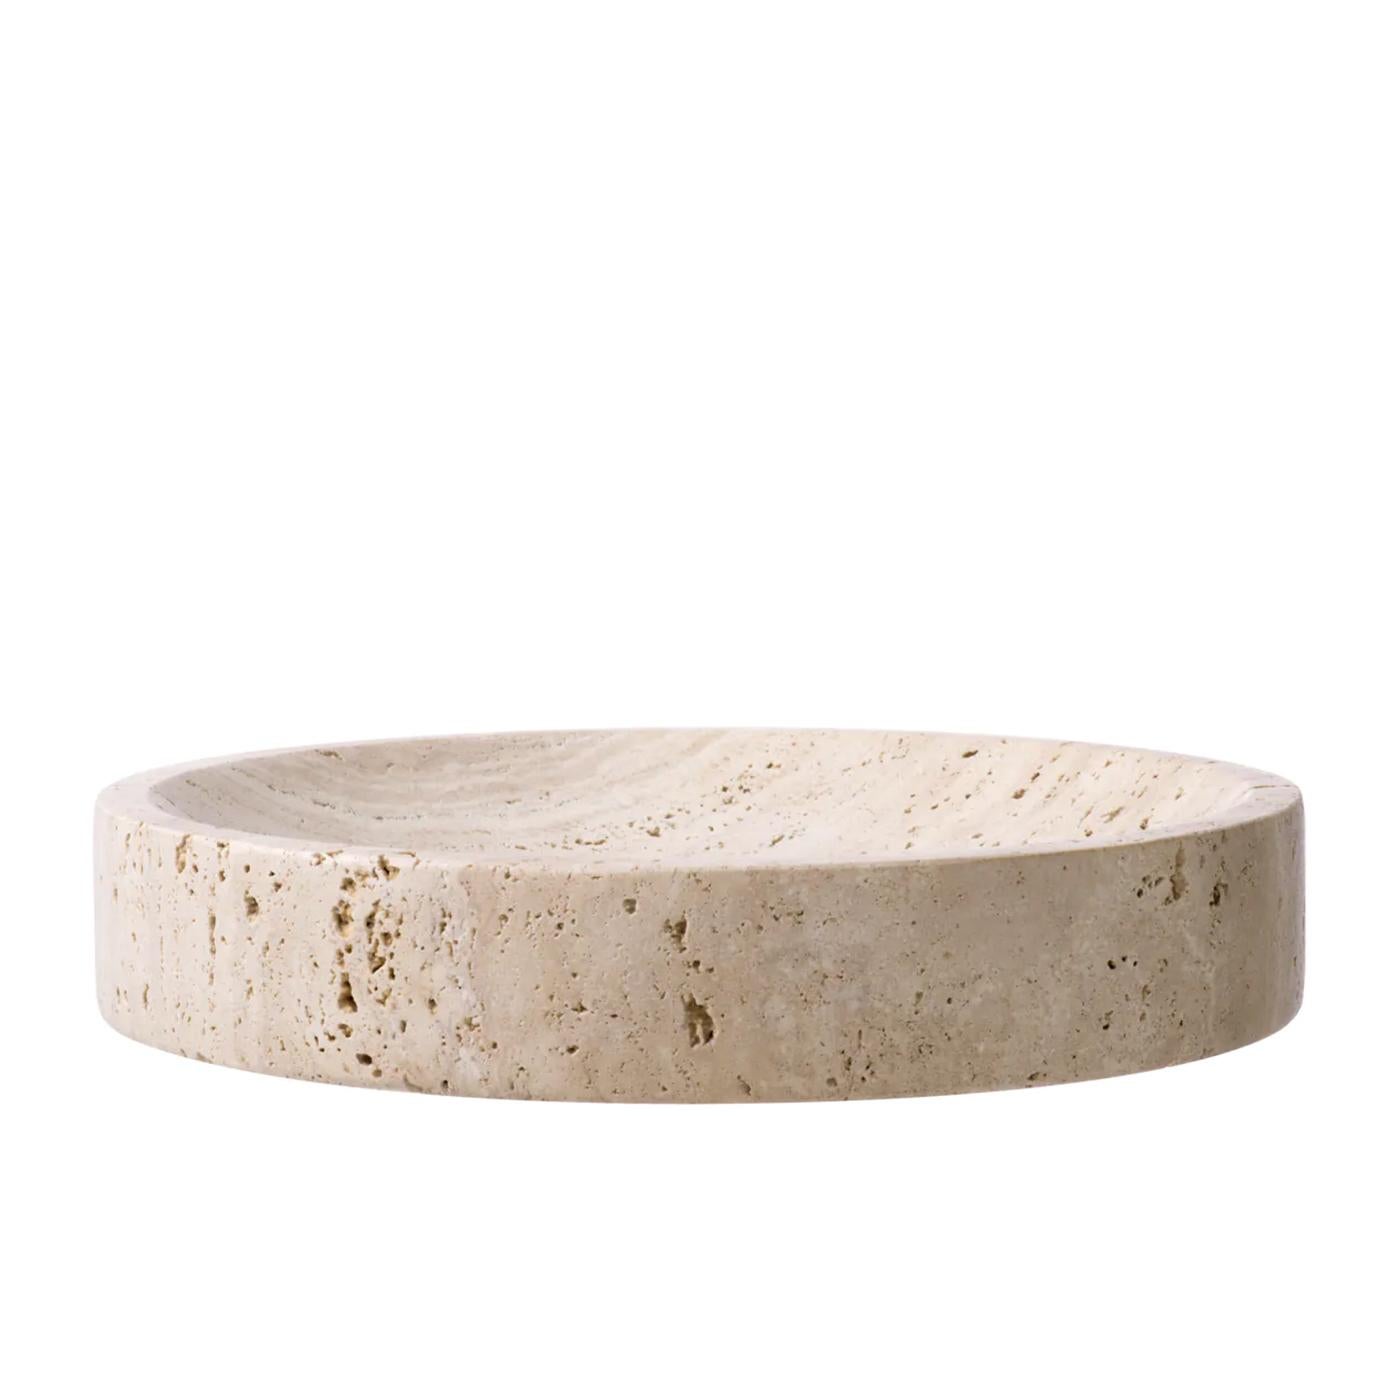 Bowl lana travertine all in solid
travertine in polished finish.